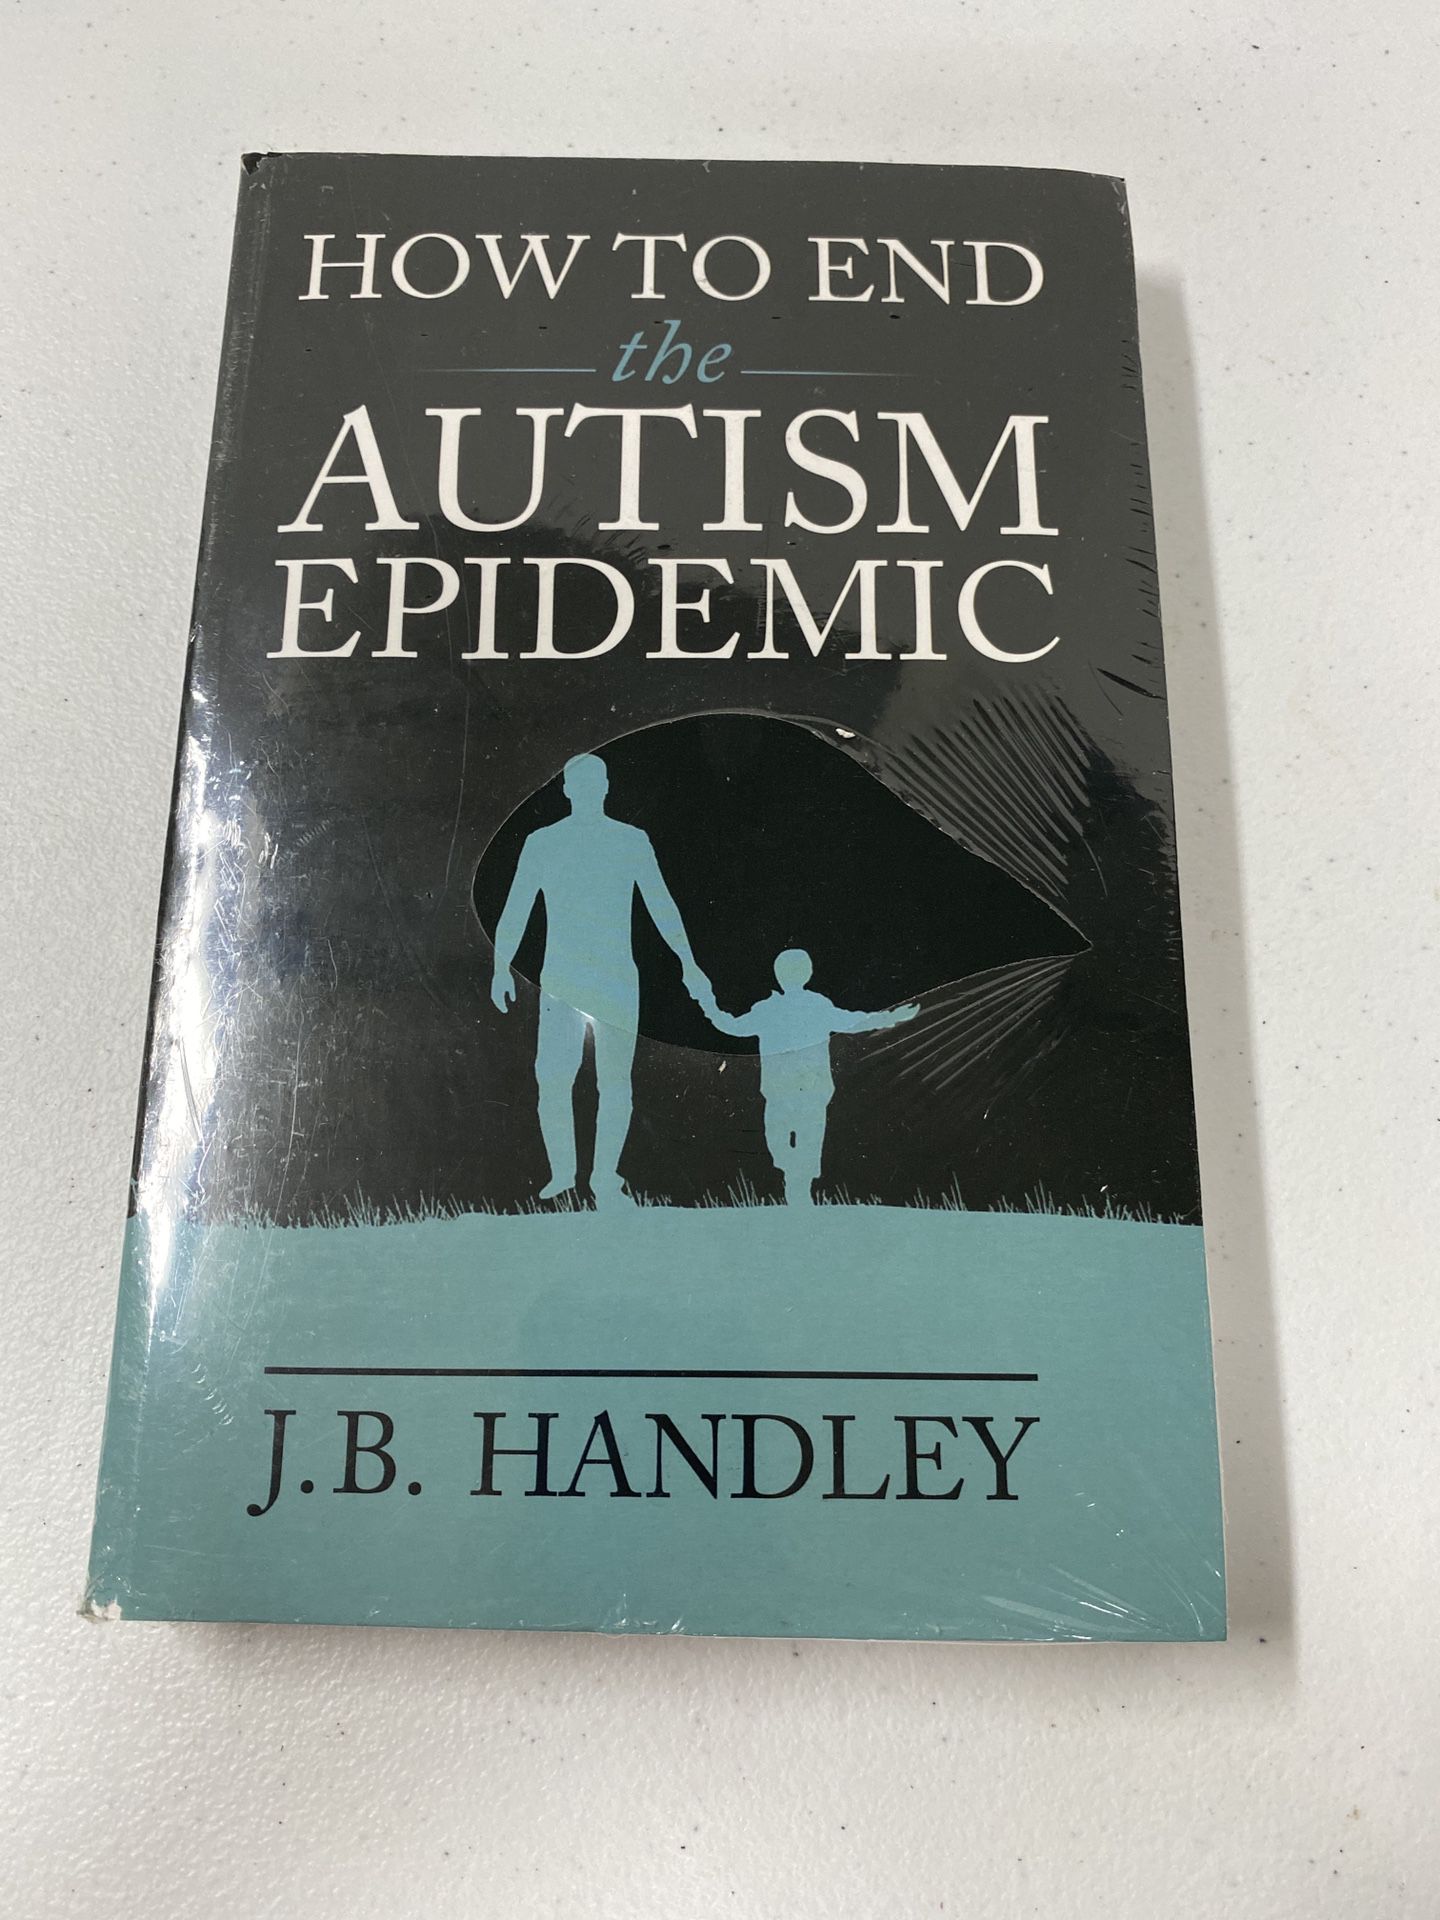 New- How to End the Autism Epidemic - Paperback/Softcover J.B. Handley